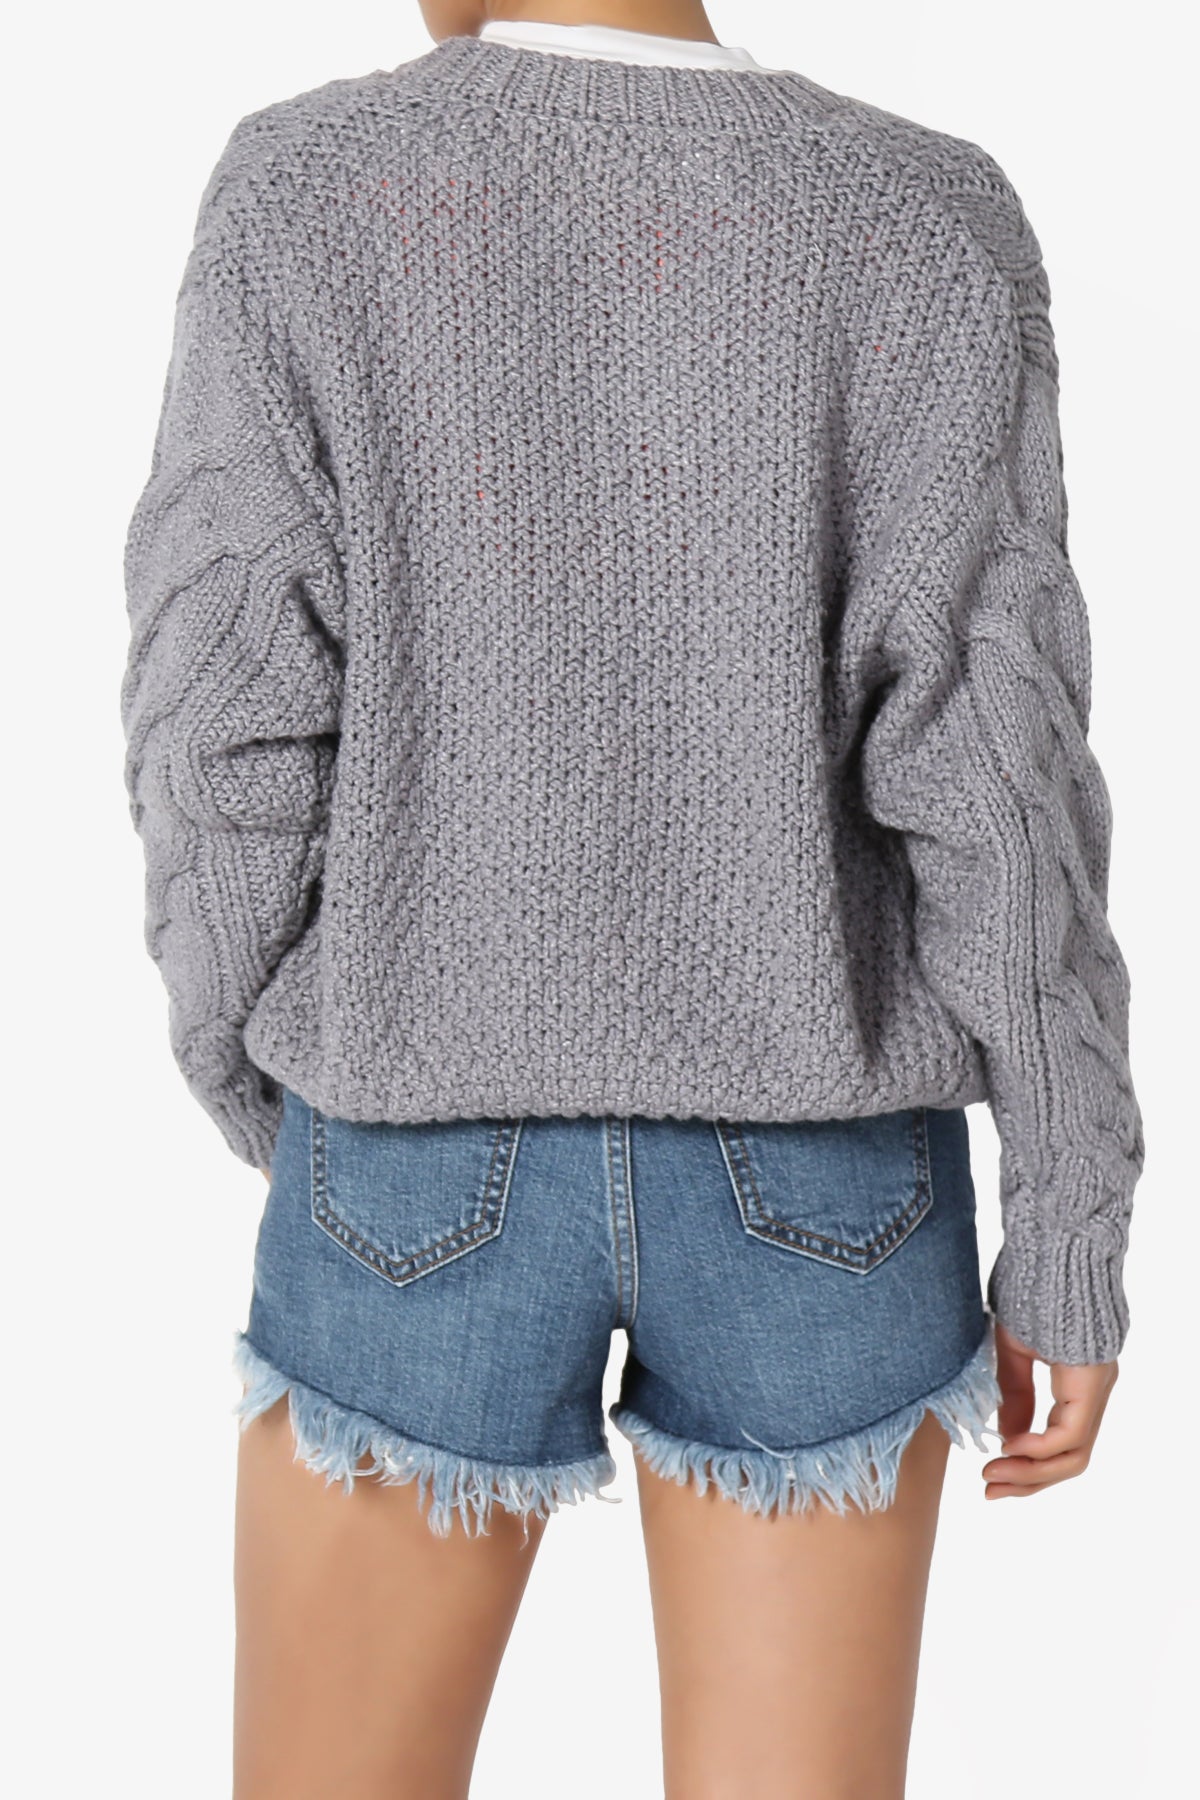 Spain Cropped Cable Knit Sweater Cardigan